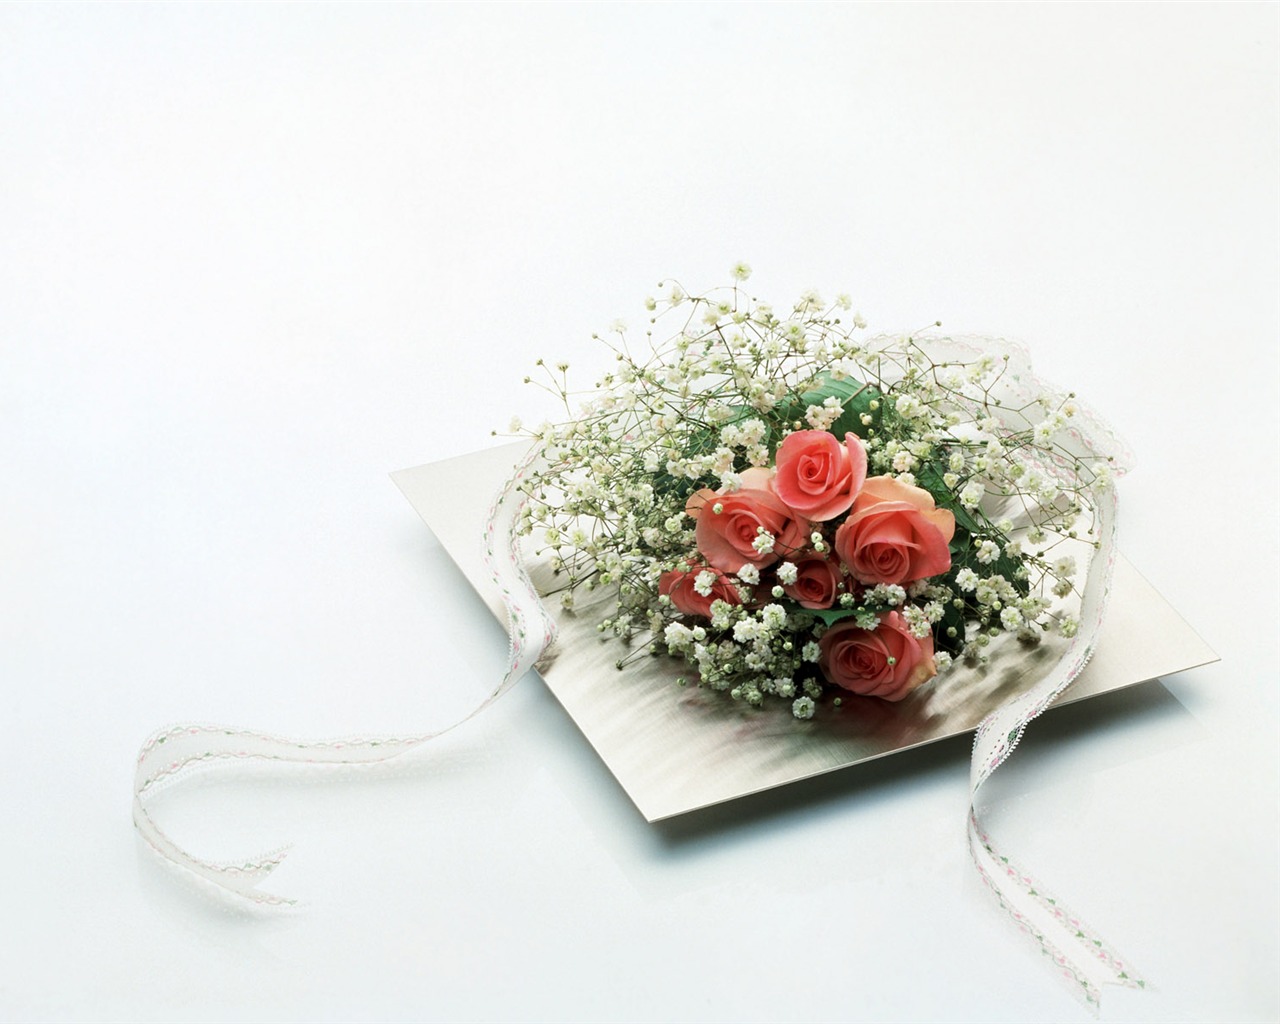 Wedding Flowers items wallpapers (2) #3 - 1280x1024